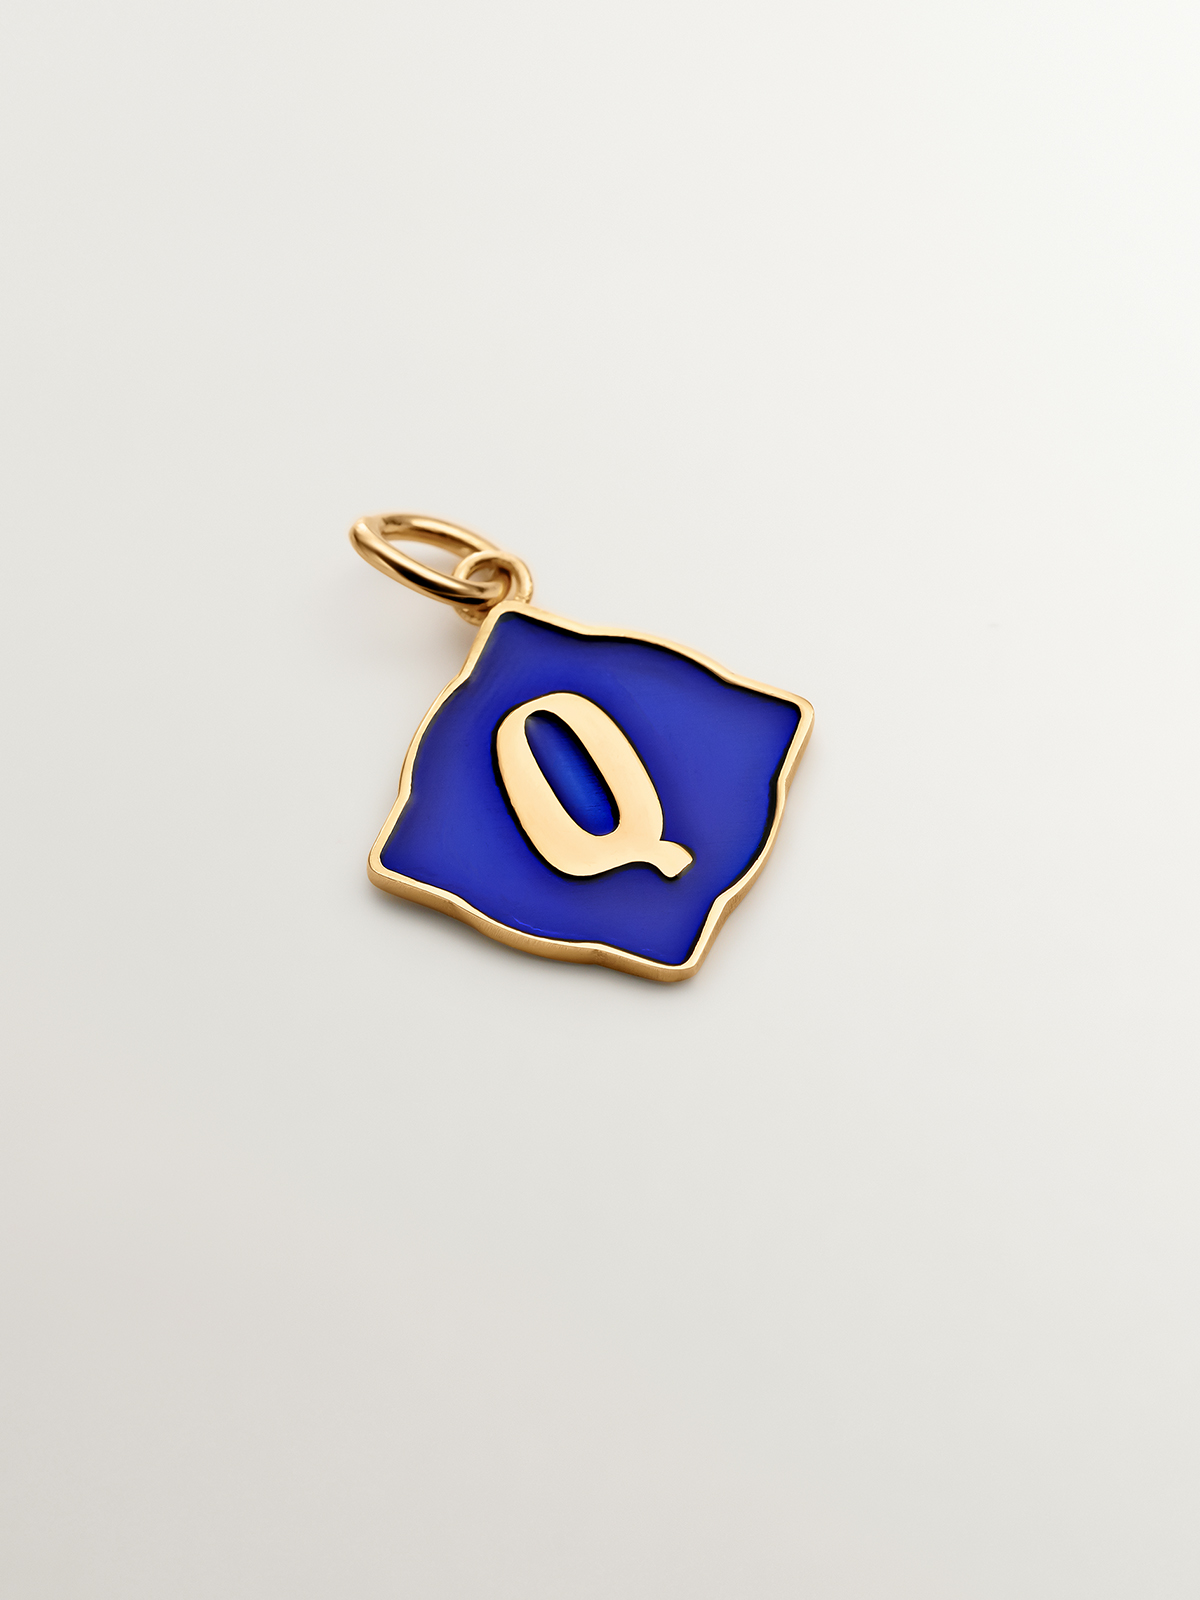 18K yellow gold plated 925 sterling silver charm with initial Q and blue enamel with irregular diamond shape